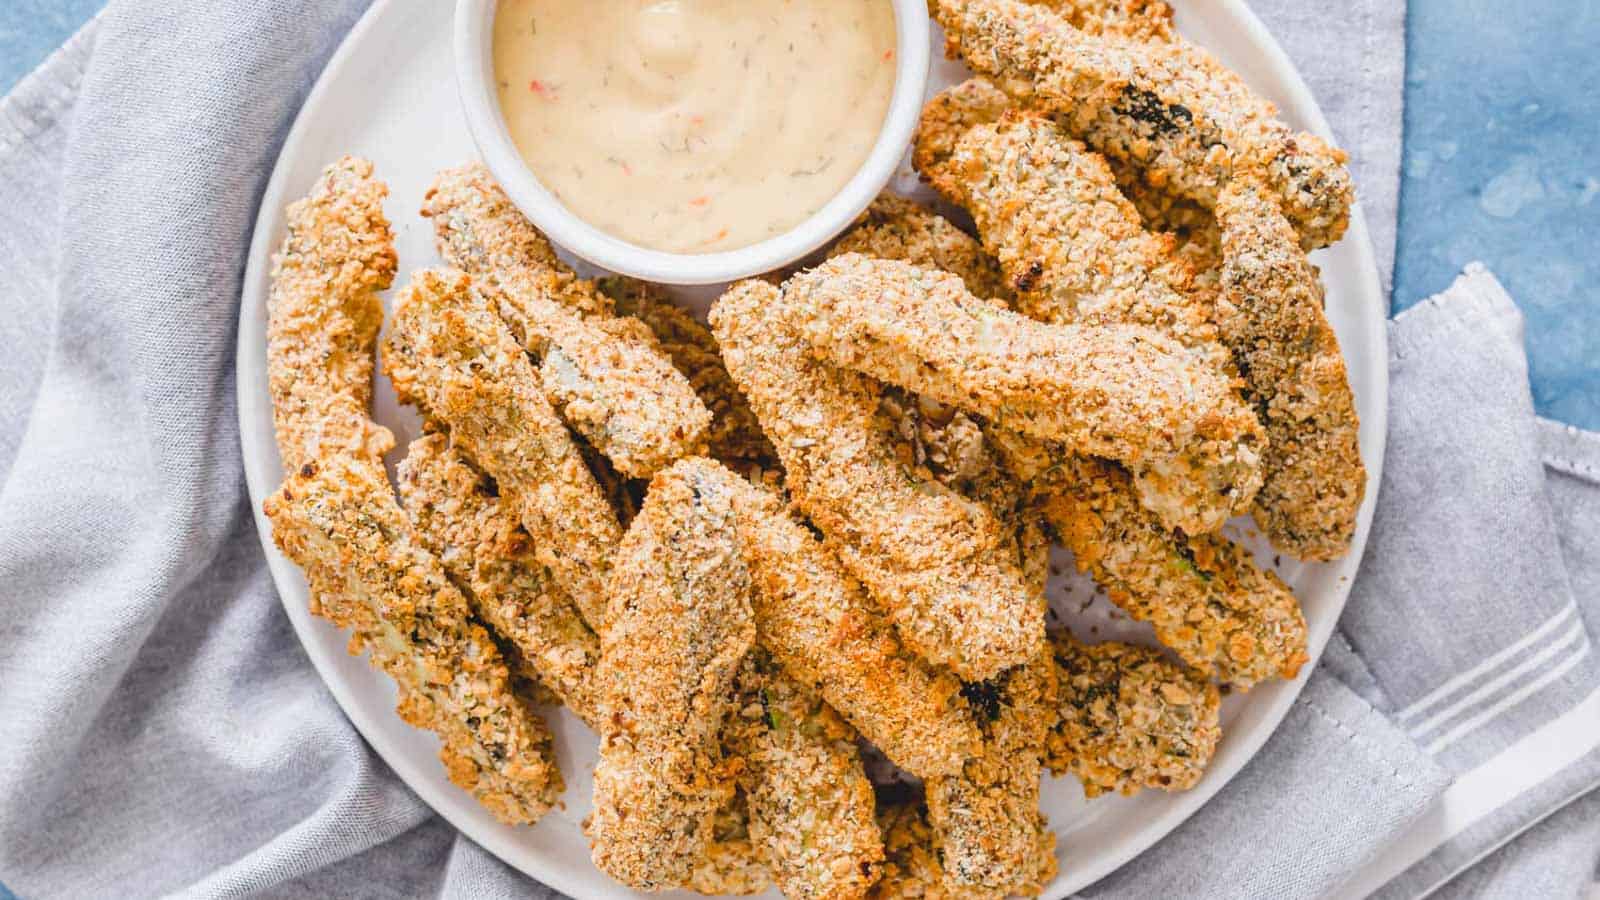 Vegan breaded zucchini fries with dipping sauce on a white plate.